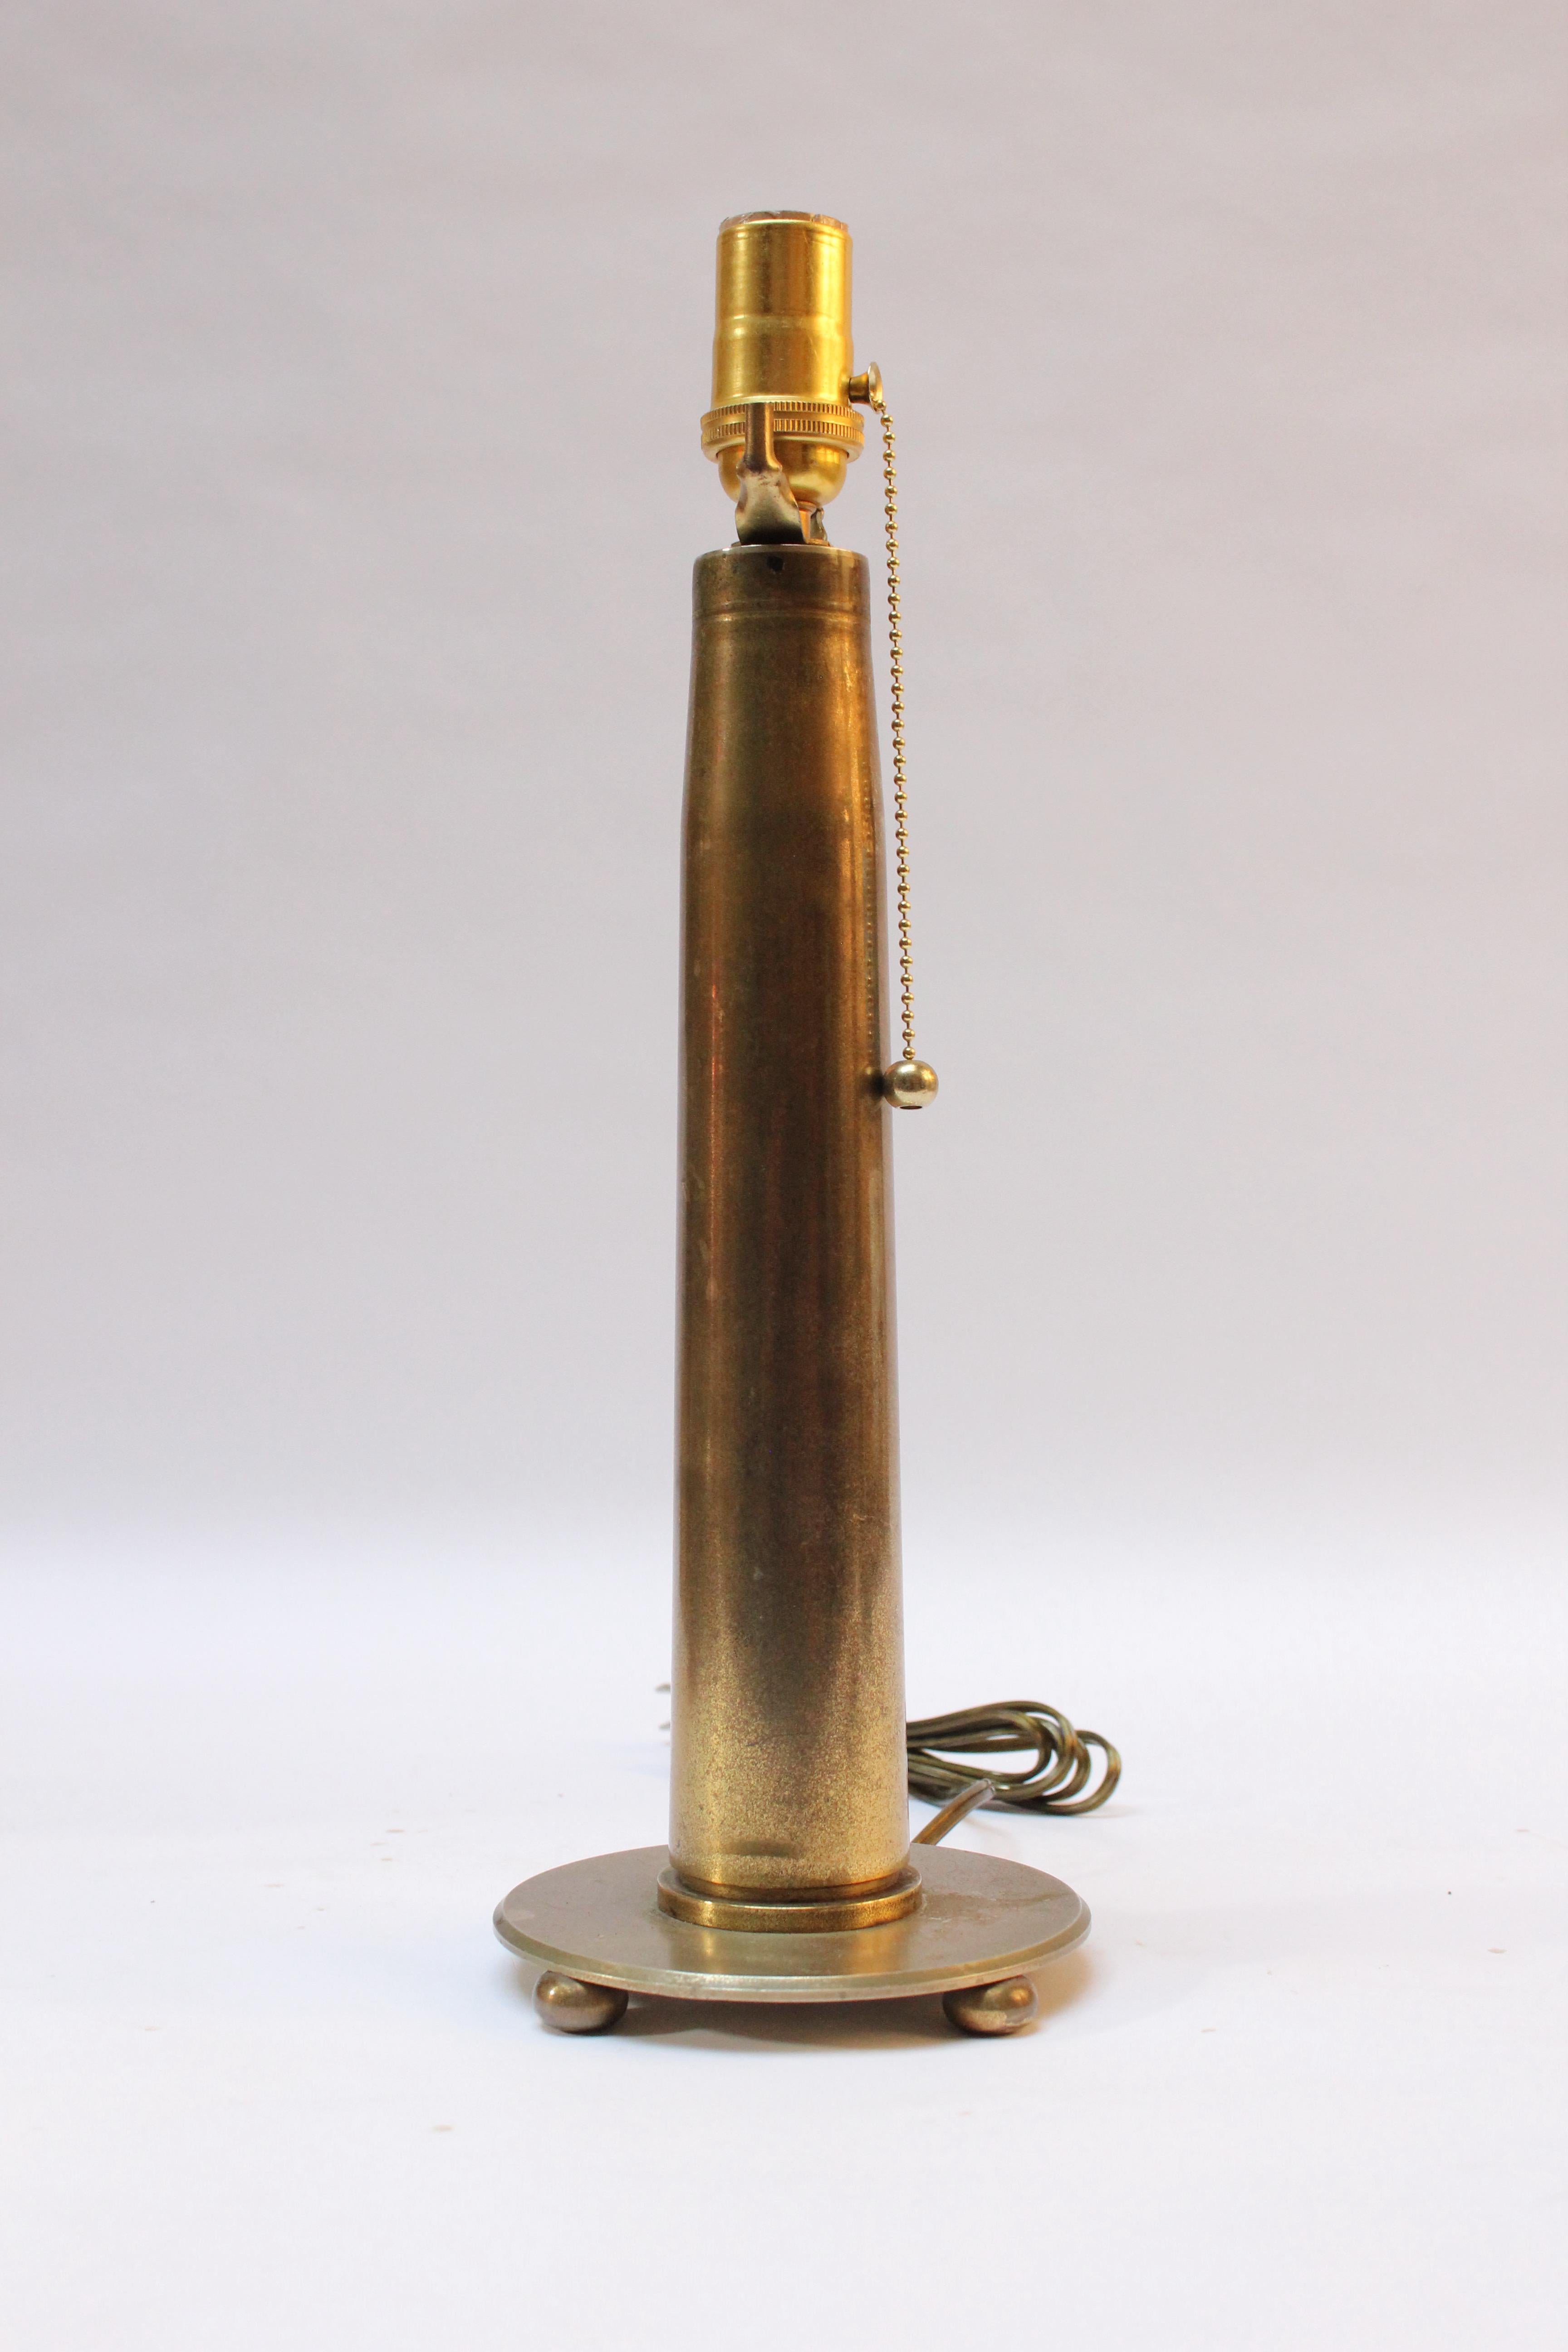 Circa 1930s Trench Art Lamp fashioned from a brass artillery shell mounted to a brass base supported by three ball feet. 
Rich patina present, as shown.
Measures: Height of shell discounting socket: 13.25